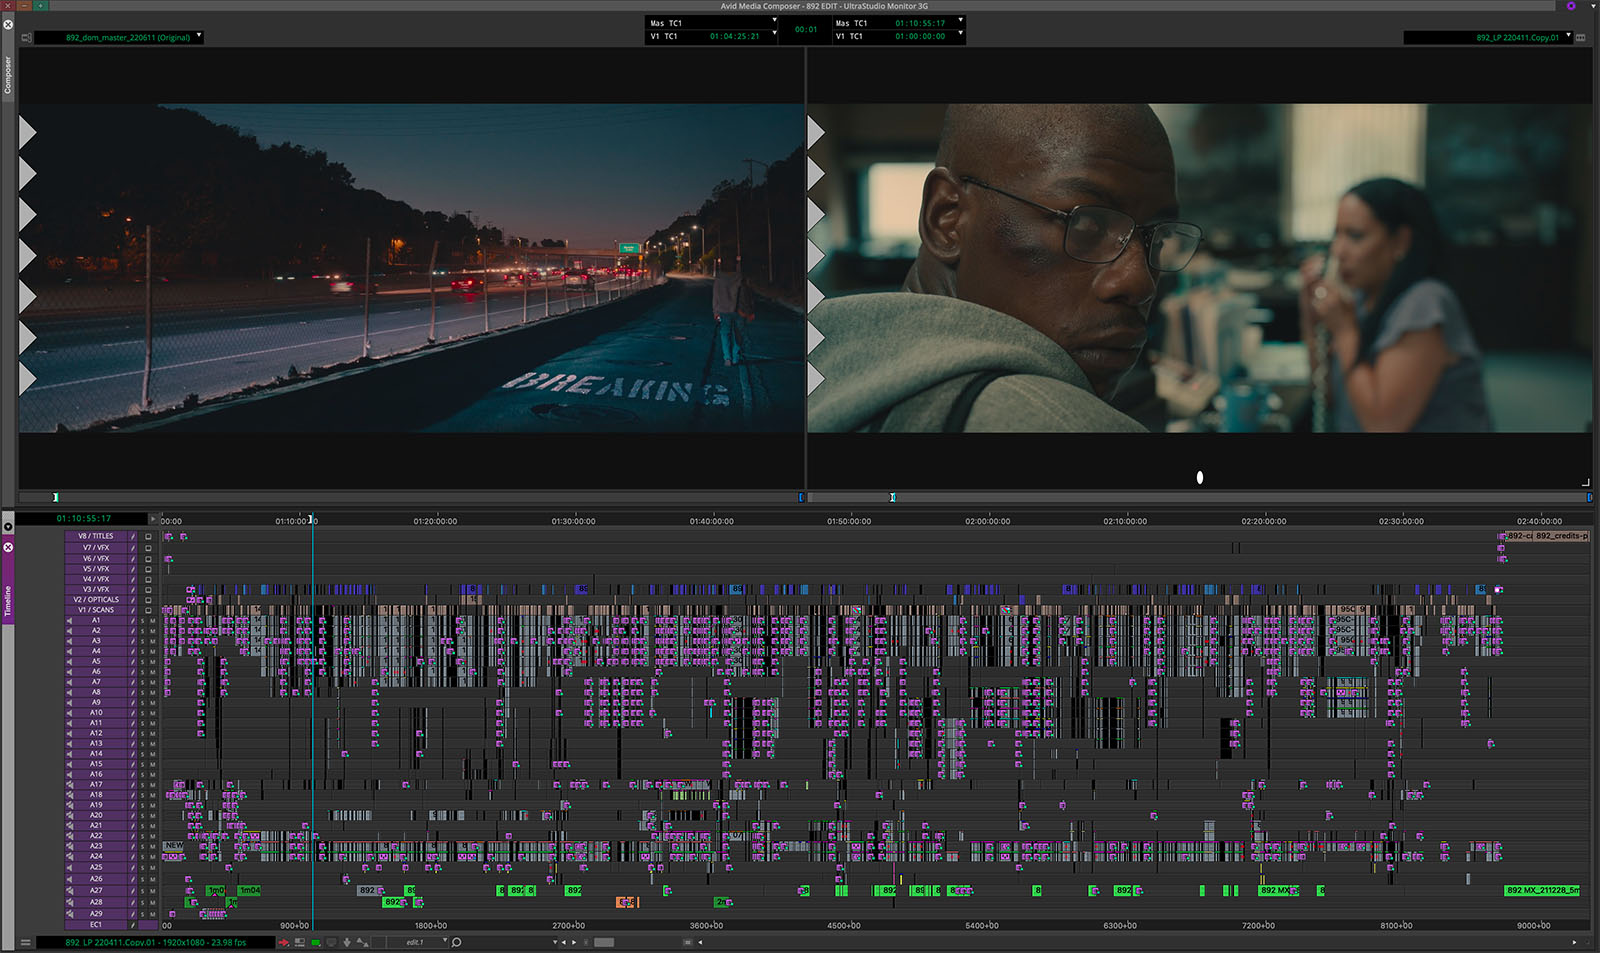 The final locked edit for Breaking. 